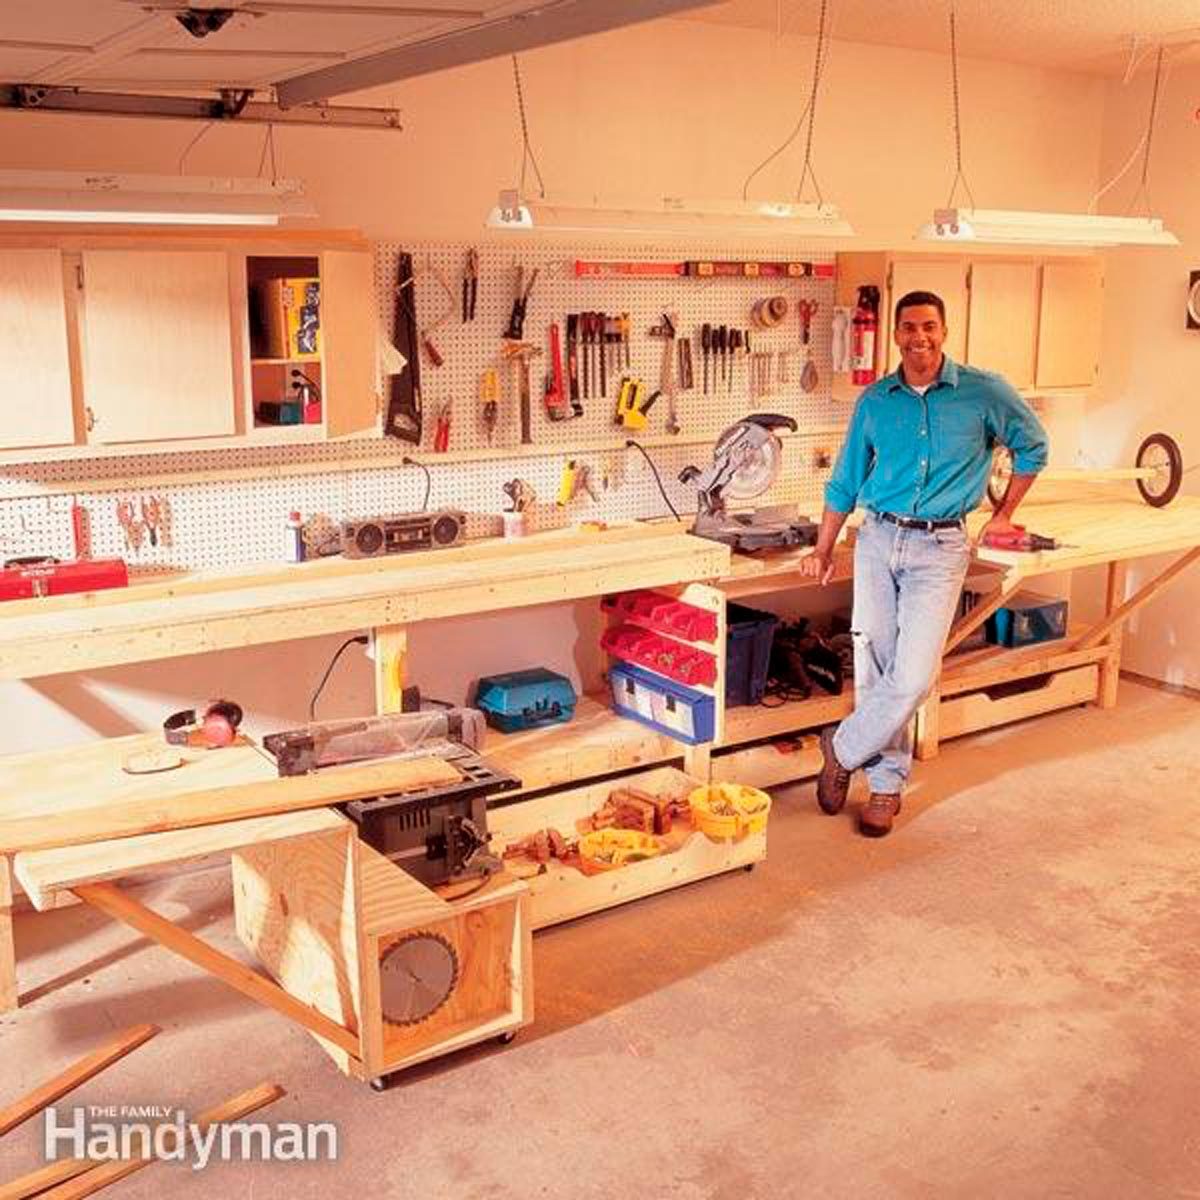 Dual Tool Workstation, Woodworking Project